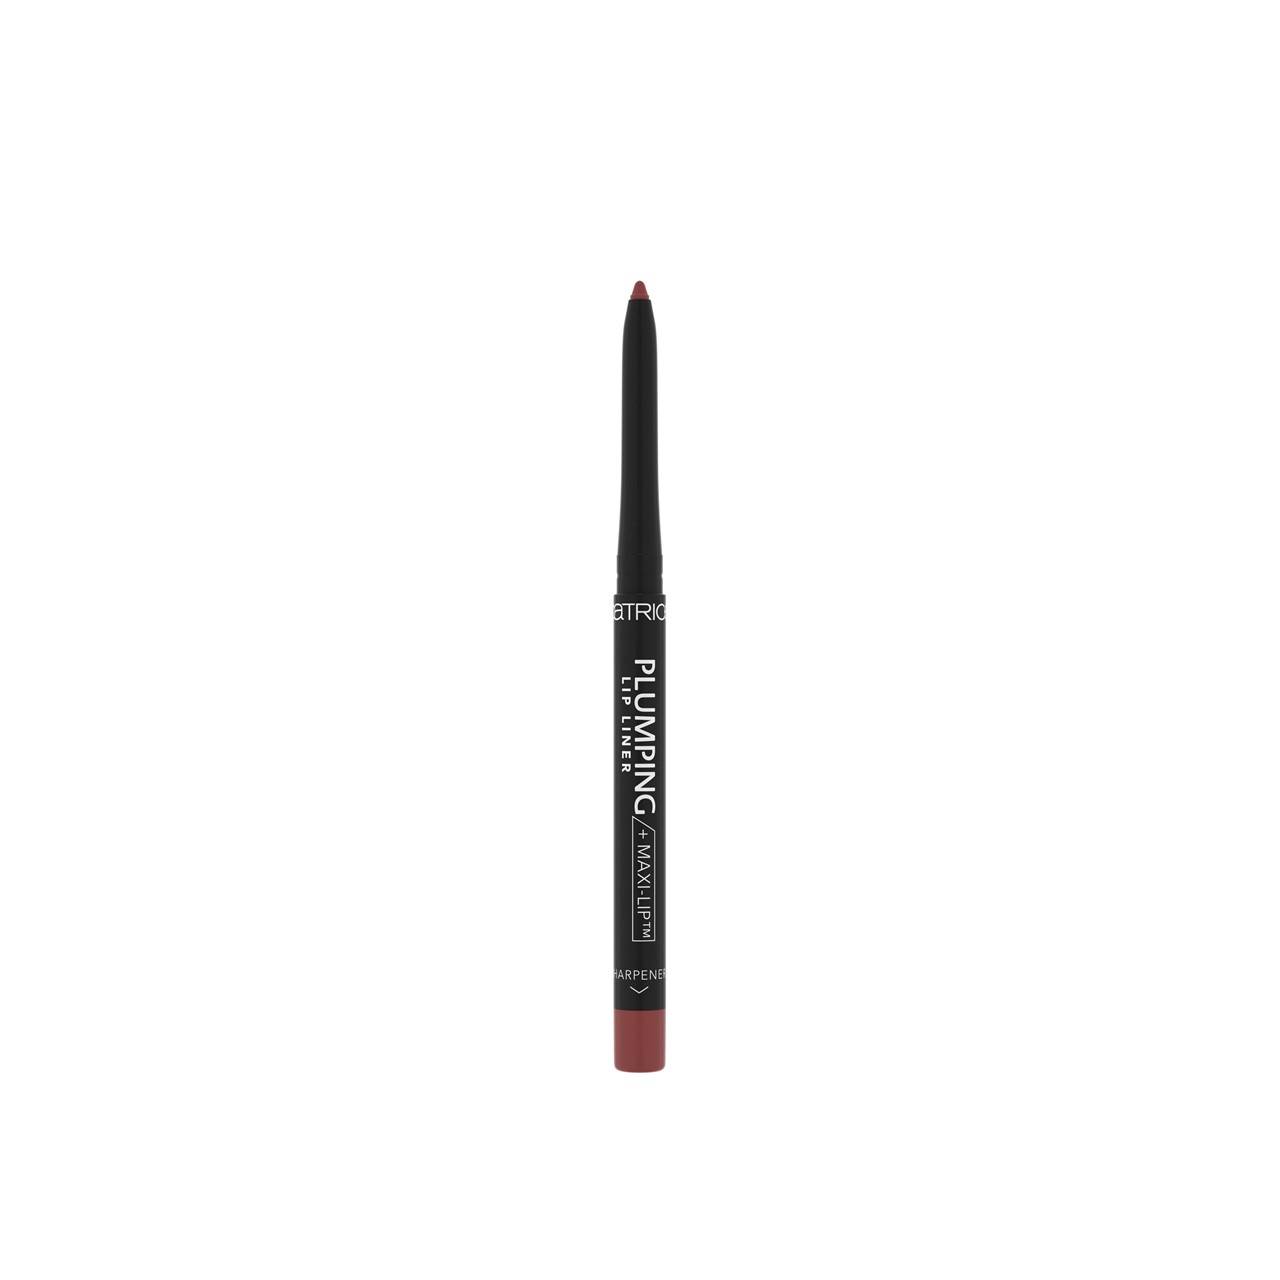 Catrice Plumping Lip Liner 040 Starring Role 0.35g (0.01oz)